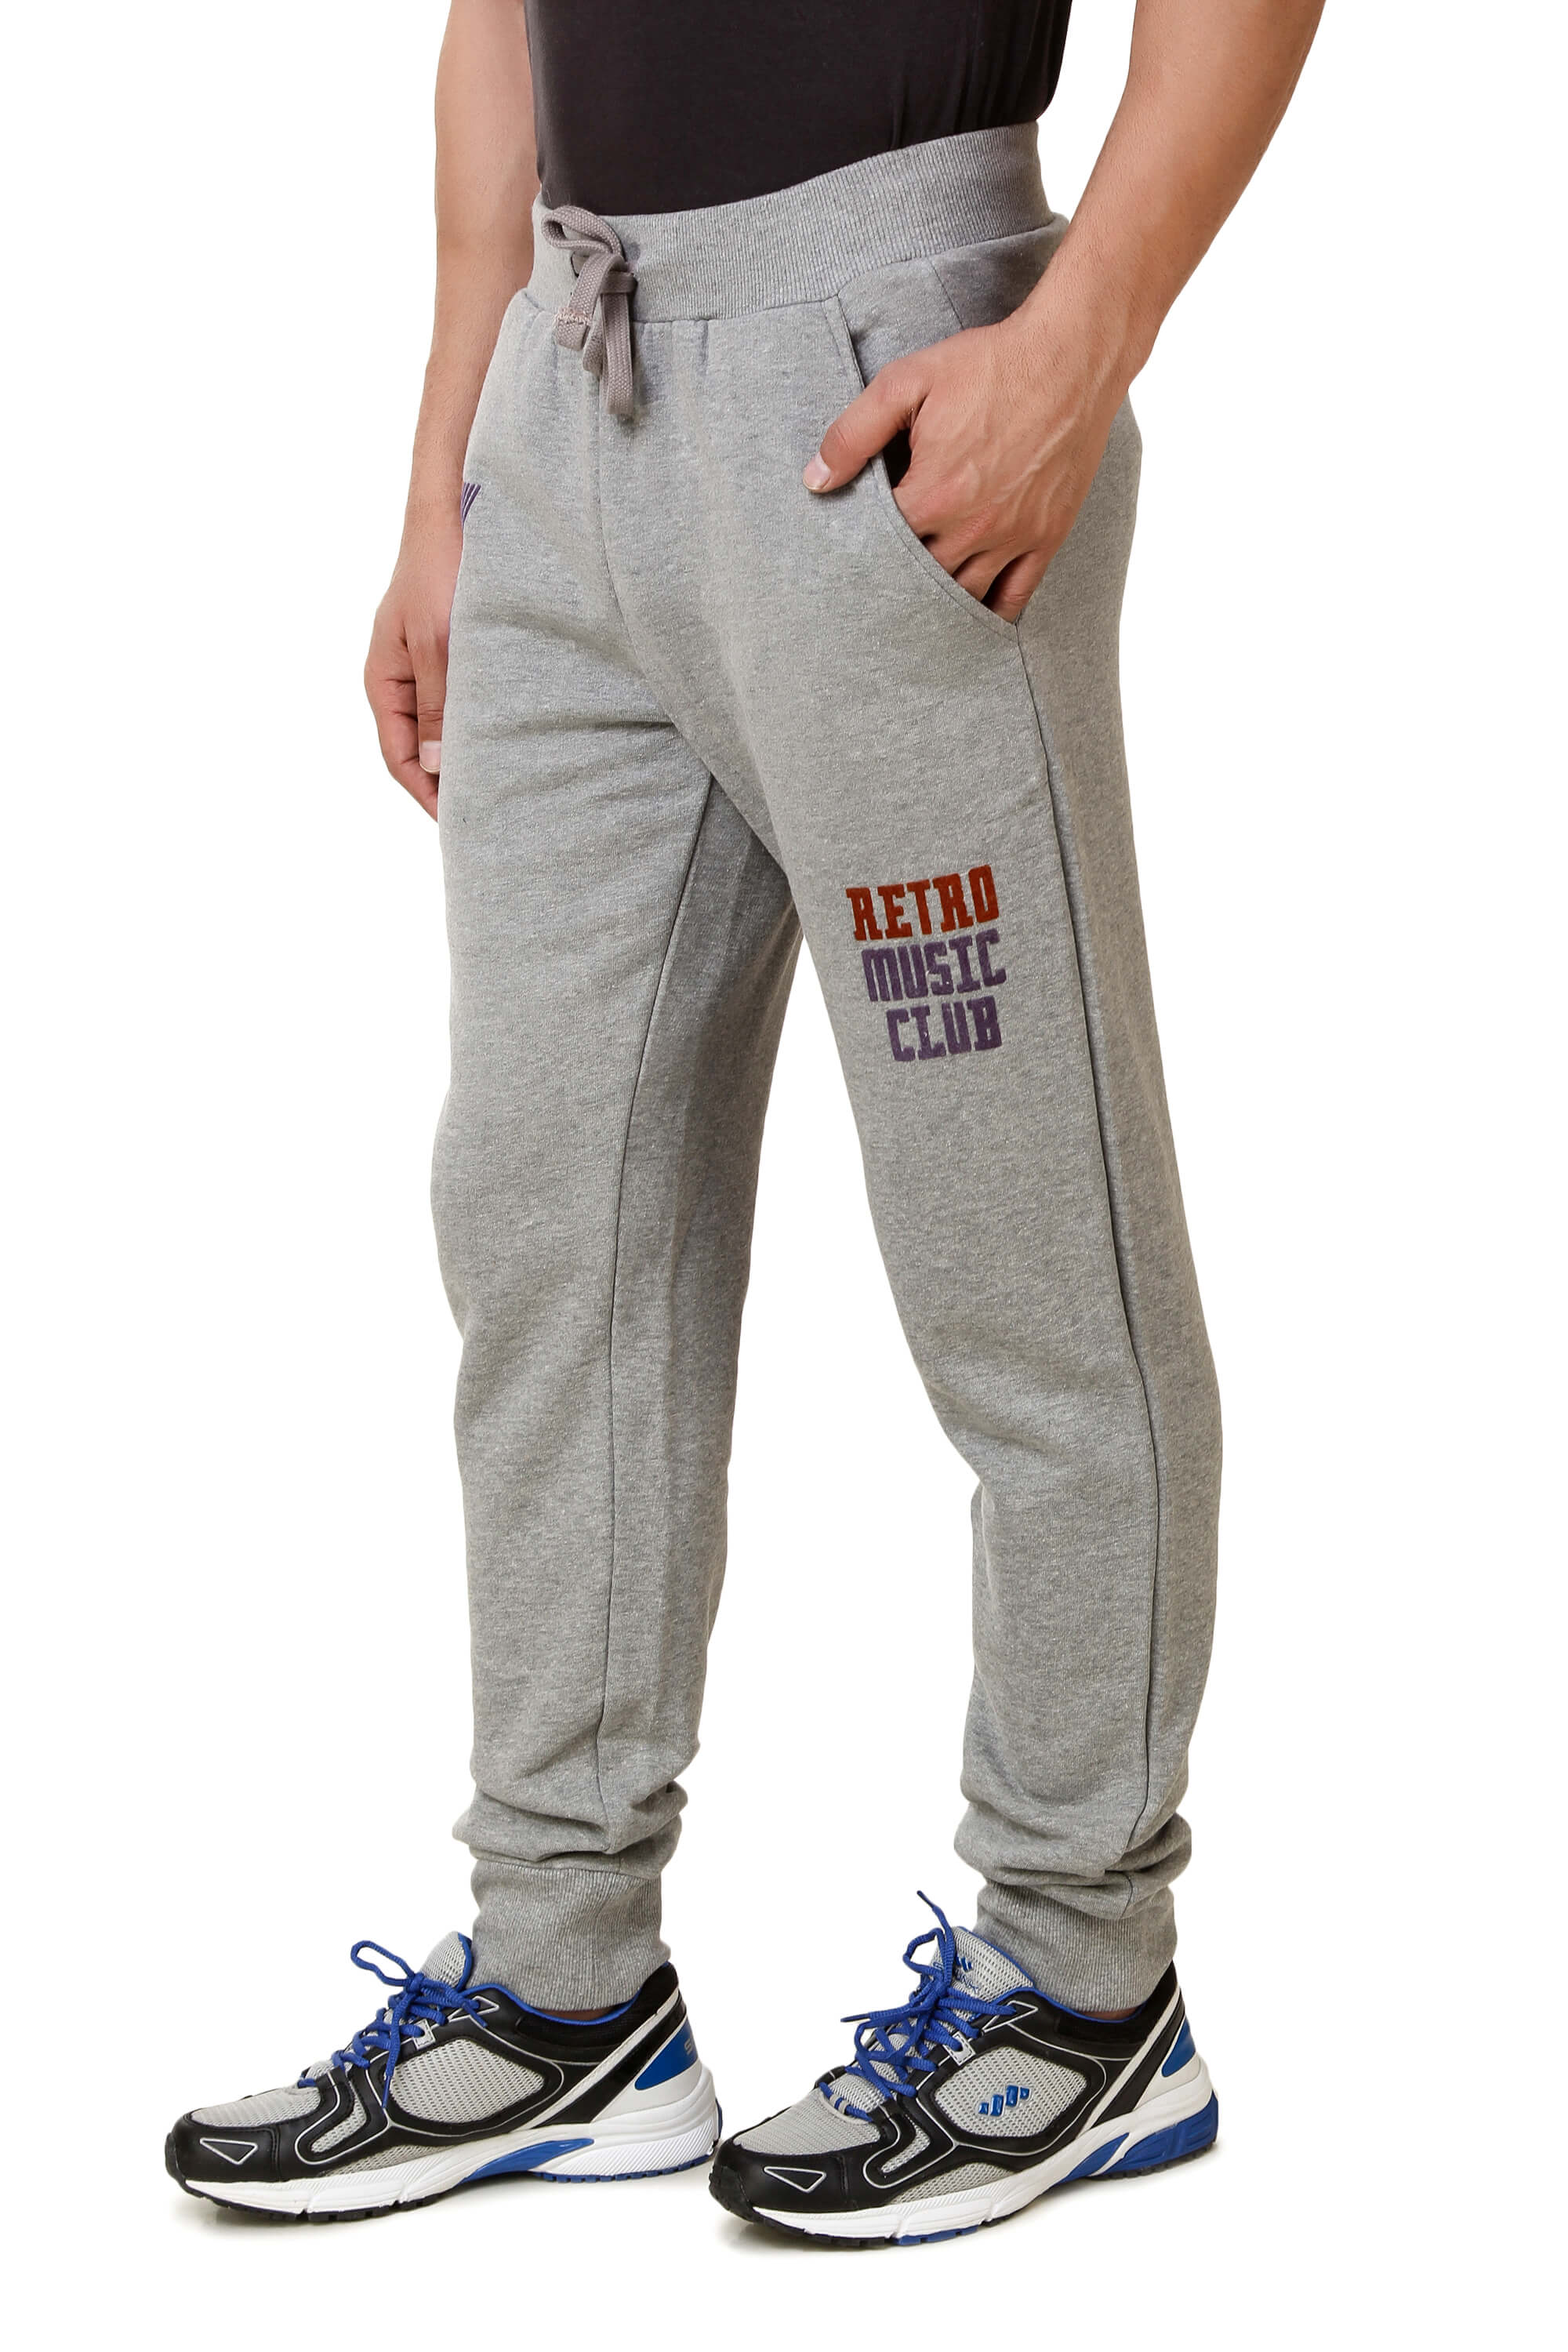 Buy Spunk Grey Pazo Track Pant For Mens Online @ ₹1799 from ShopClues